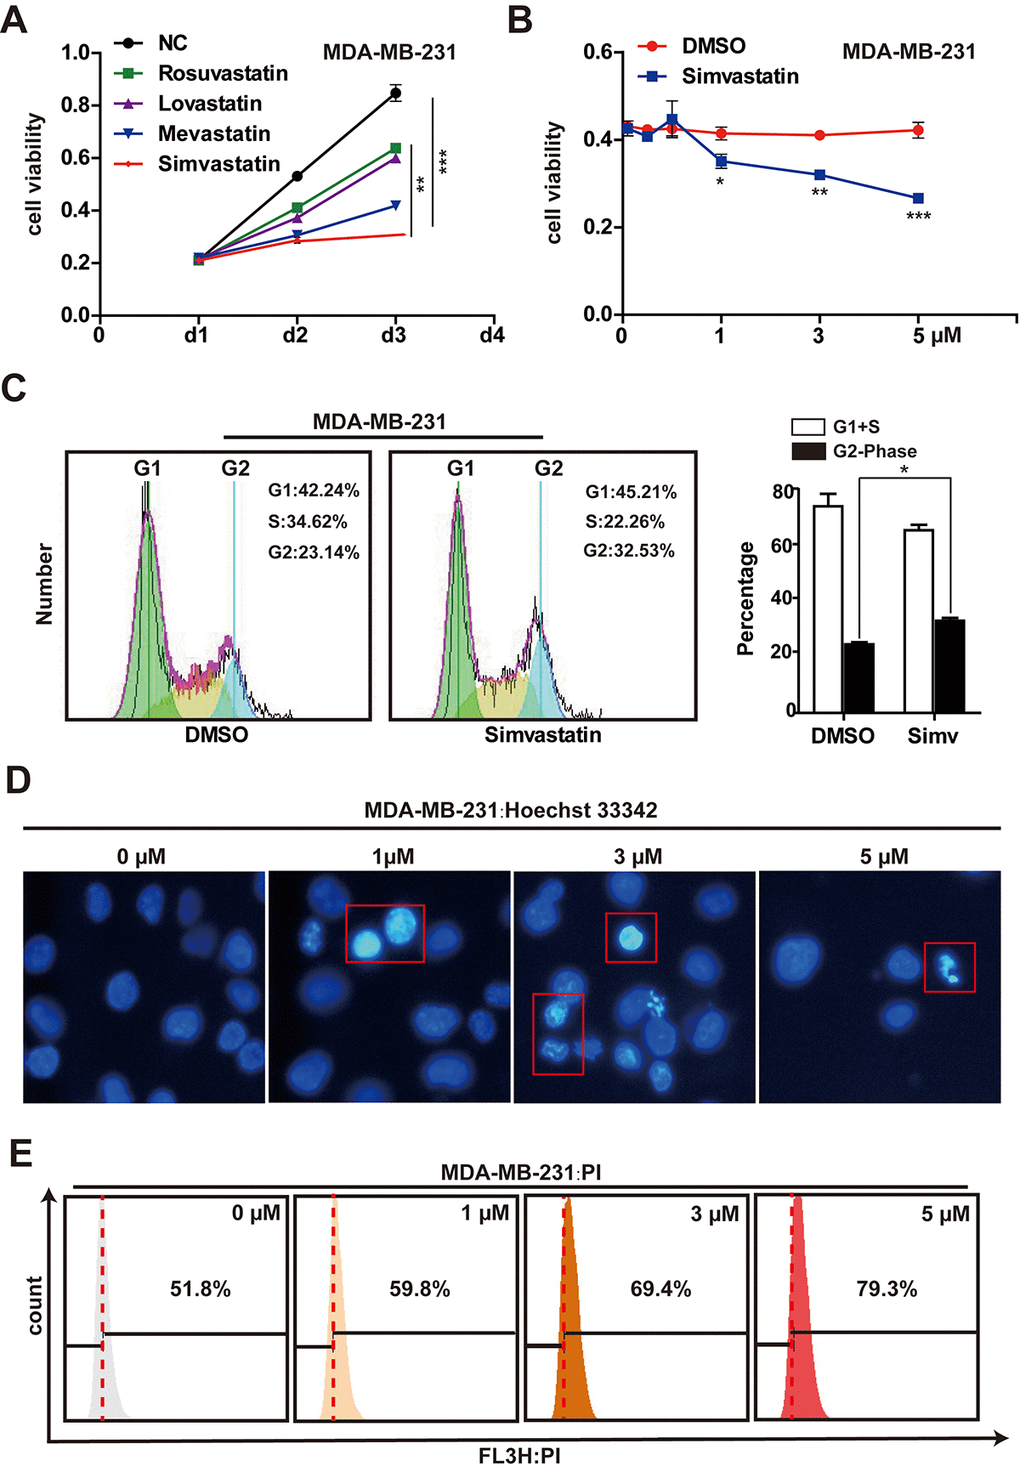 Effects of simvastatin on cell proliferation and cell death in MDA-MB-231 cells. (A) MDA-MB-231 cells were treated with 1µM rosuvastatin, lovastatin, mevastatin or simvastatin for 24h and 48h. (B) MDA-MB-231 cells were treated with varying concentrations (1-5µM) of simvastatin for a period of 48h. All the cell viability (cell proliferation) assays were analyzed by the CCK-8 assay. (C) the effects of simvastatin on the cell cycle were measured by flow cytometry with PI staining. (D) Representative photomicrography of treated MDA-MB-231 cells with varying doses simvastatin showing nuclei fragmentation. (E) MDA-MB-231 were treated with various doses of simvastatin for 48h. Cell death was determined by PI FACS analyses. The percentage of necrotic/apoptosis cells (PI positive) were moved to the right quadrant (Relative to 0µM). The p-values were calculated using standard Student t-tests. Error bars represent mean± SEM of three individual experiments. *** P ≤ 0.001, ** P ≤ 0.01, * P ≤ 0.05.